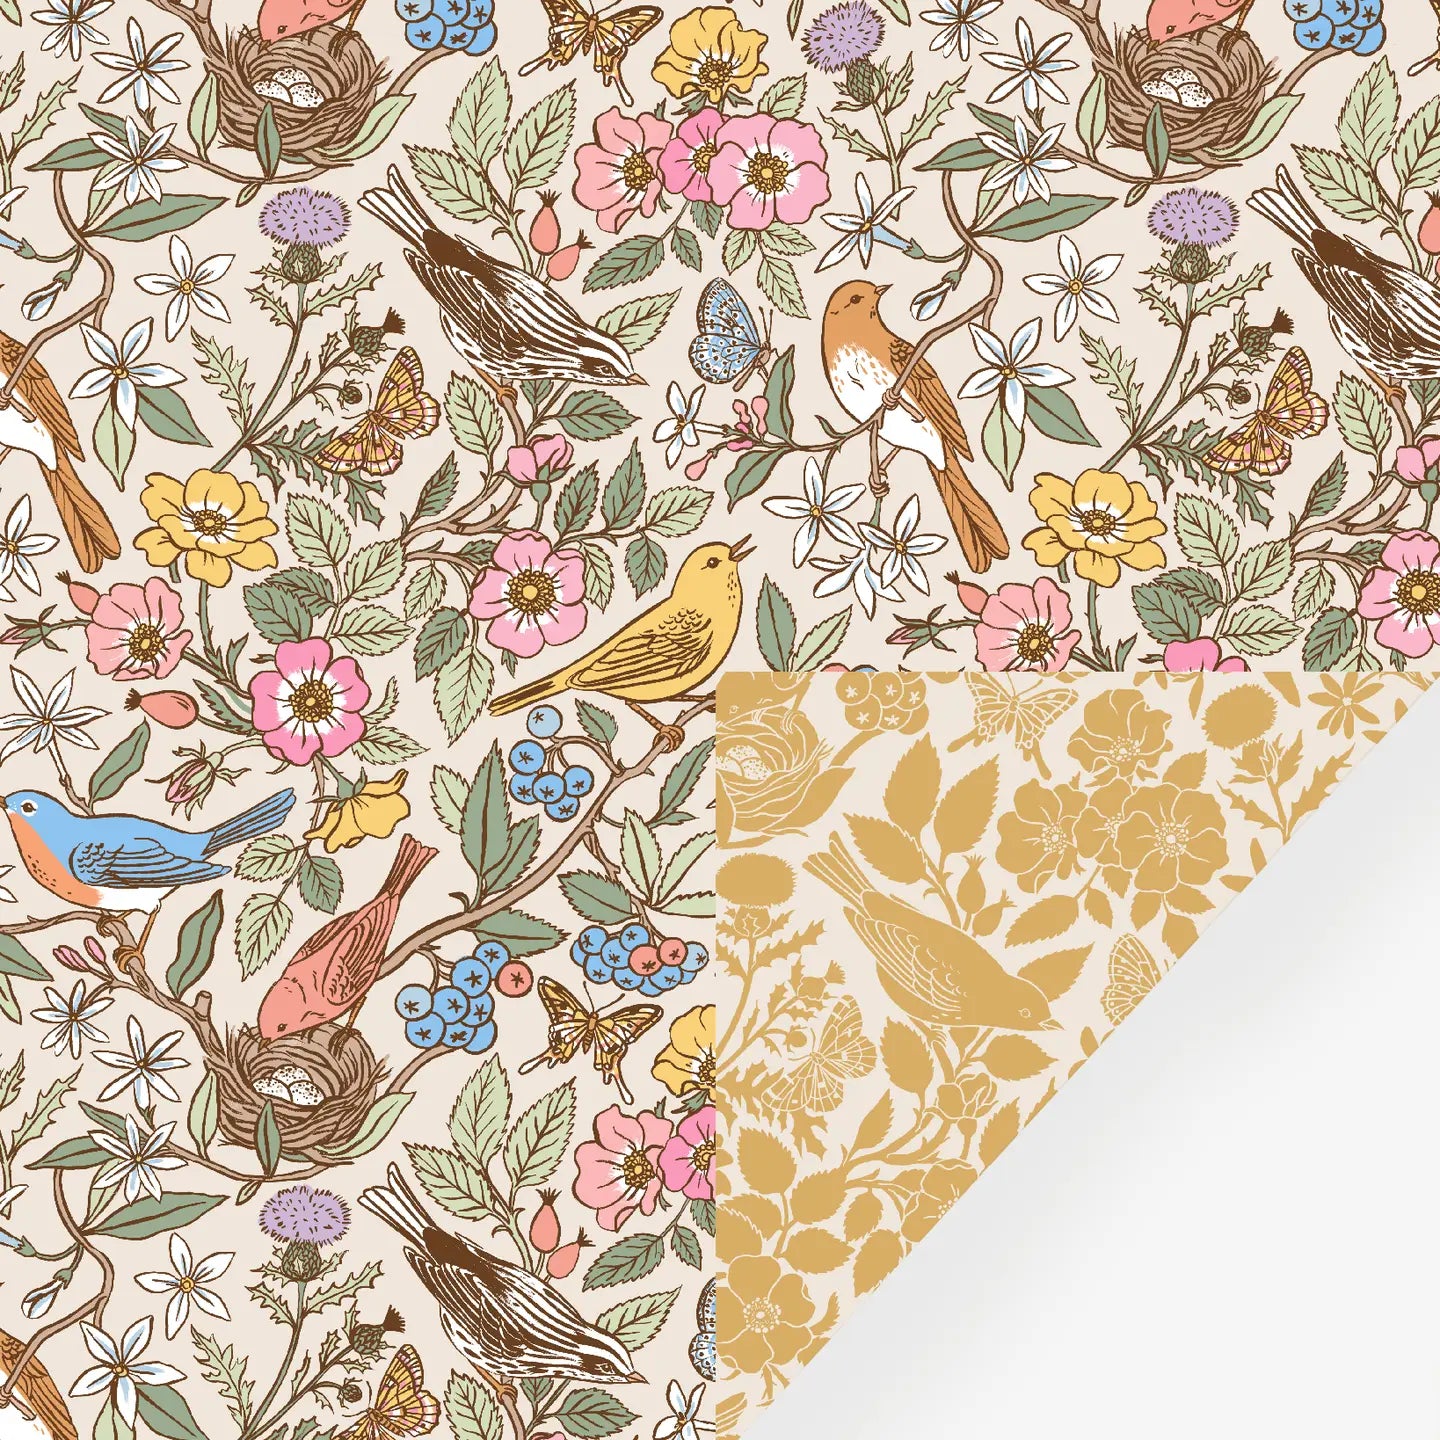 Double Sided Wrapping Sheet - Songbirds